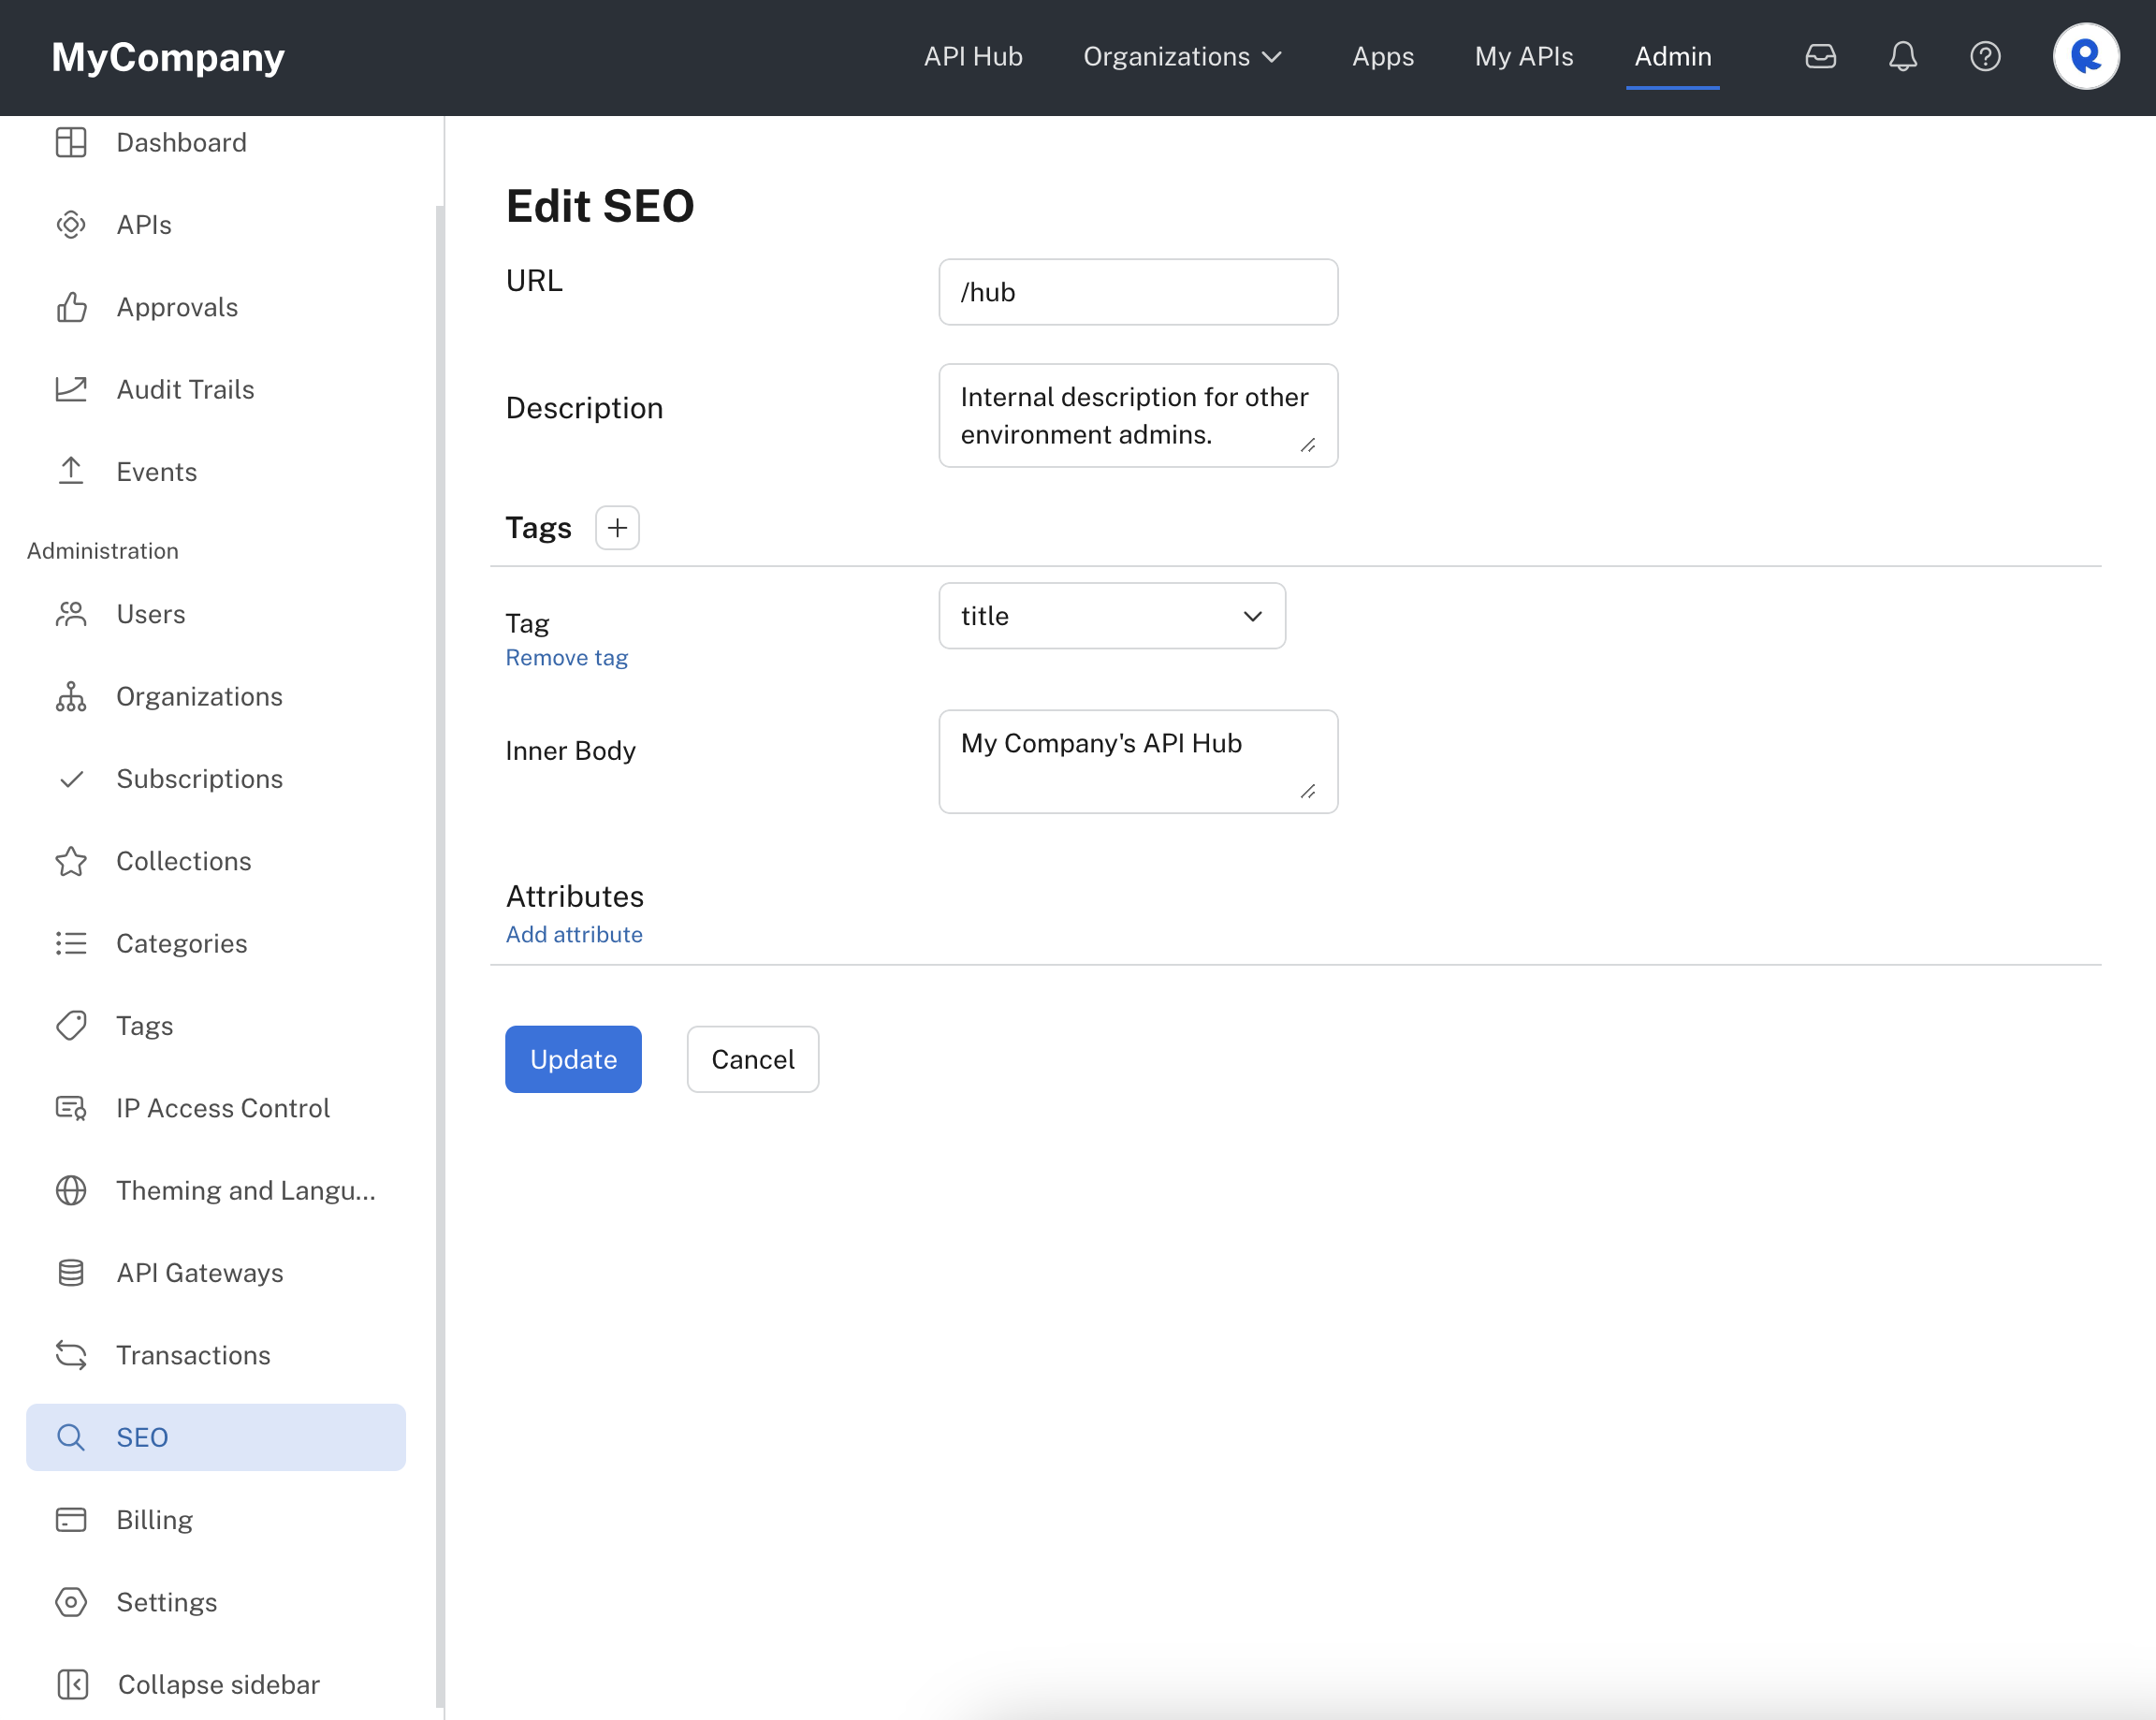 Adding an SEO configuration in the Admin Panel.